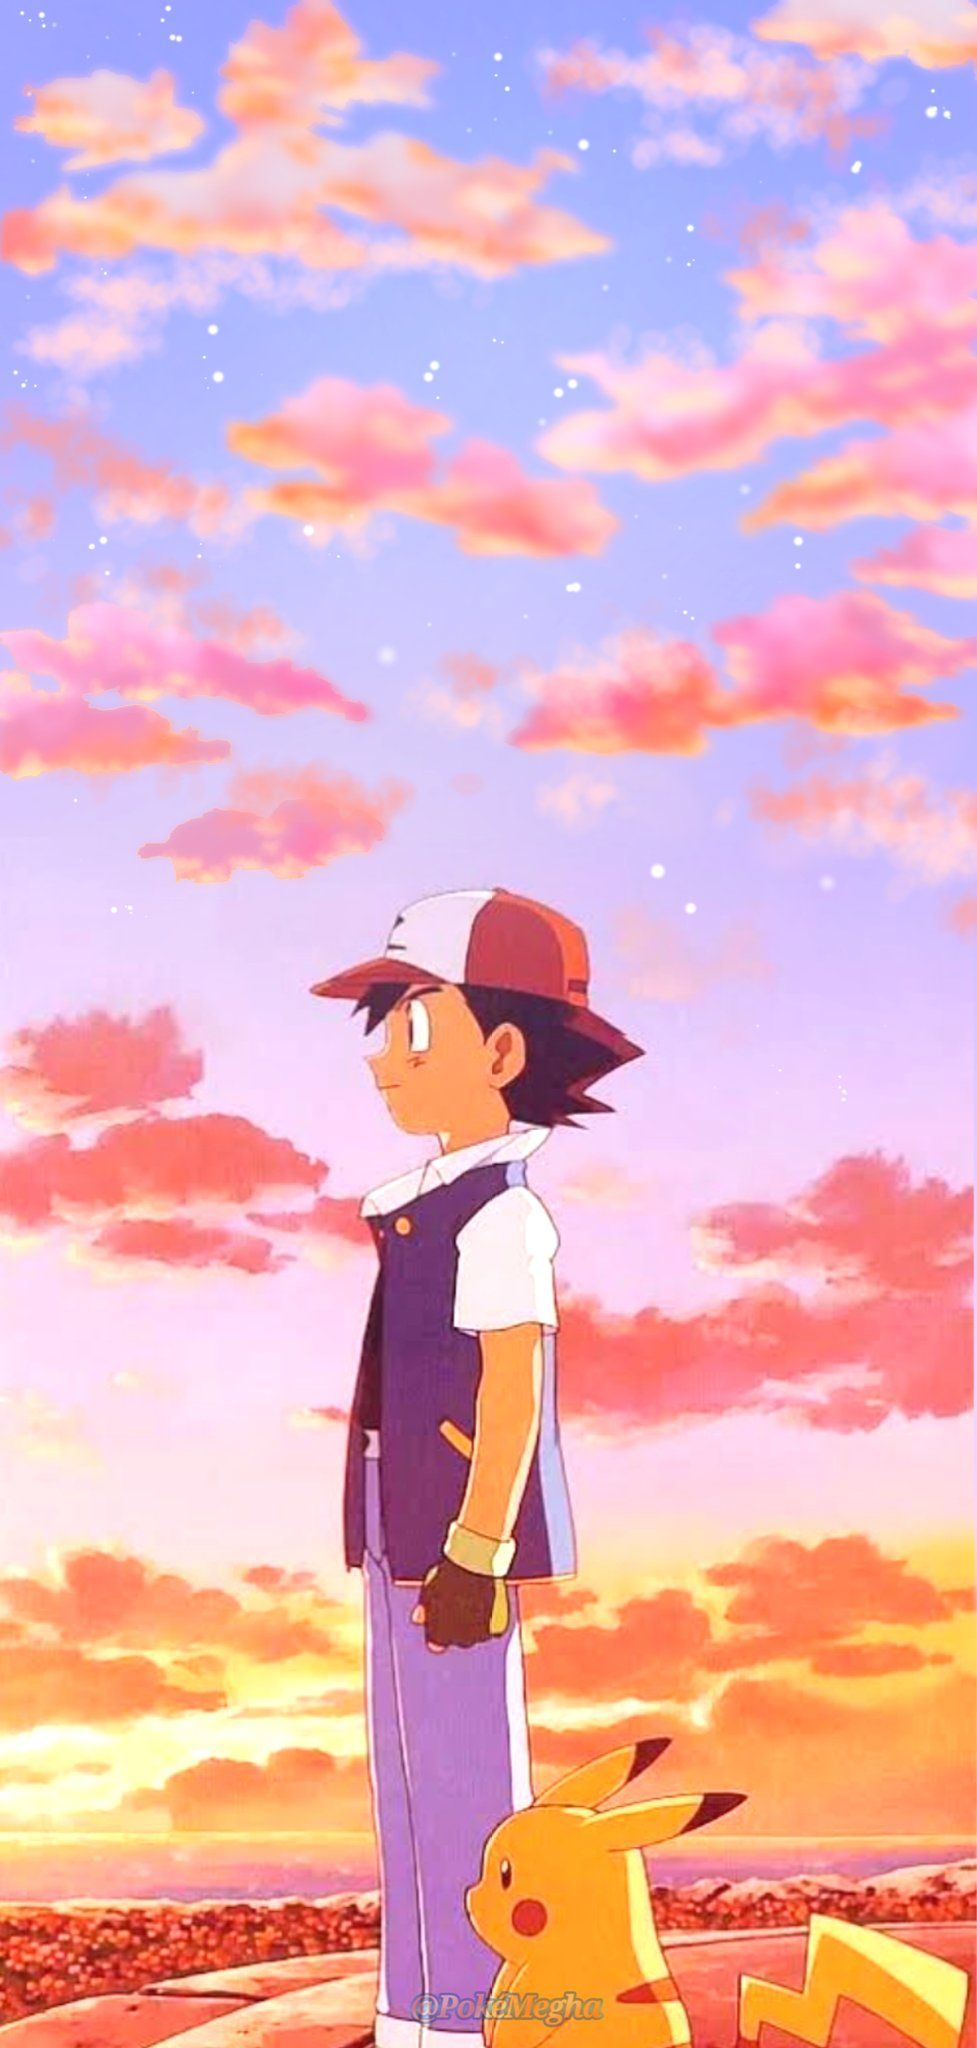 Ash and Pikachu in the sunset - Pokemon